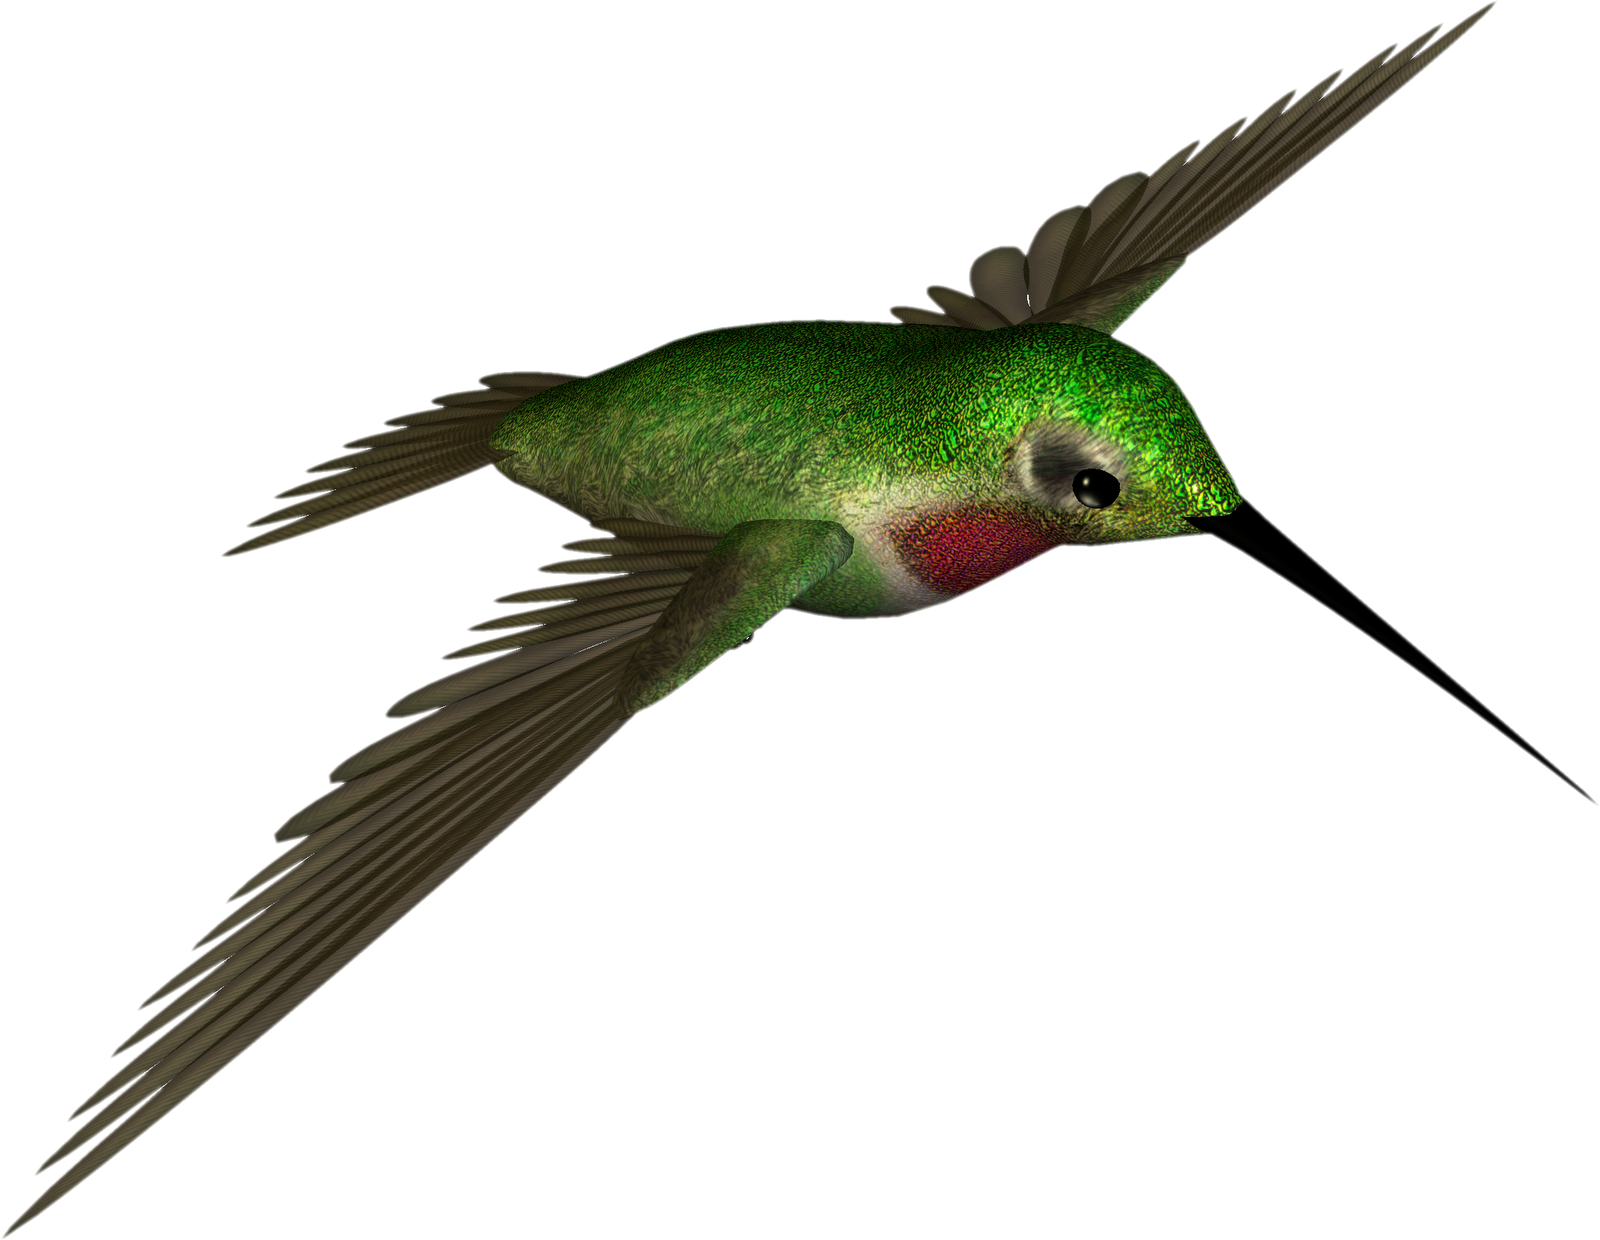 Free High Resolution Graphics And Clip Art - Hummingbird .png (1600x1240)